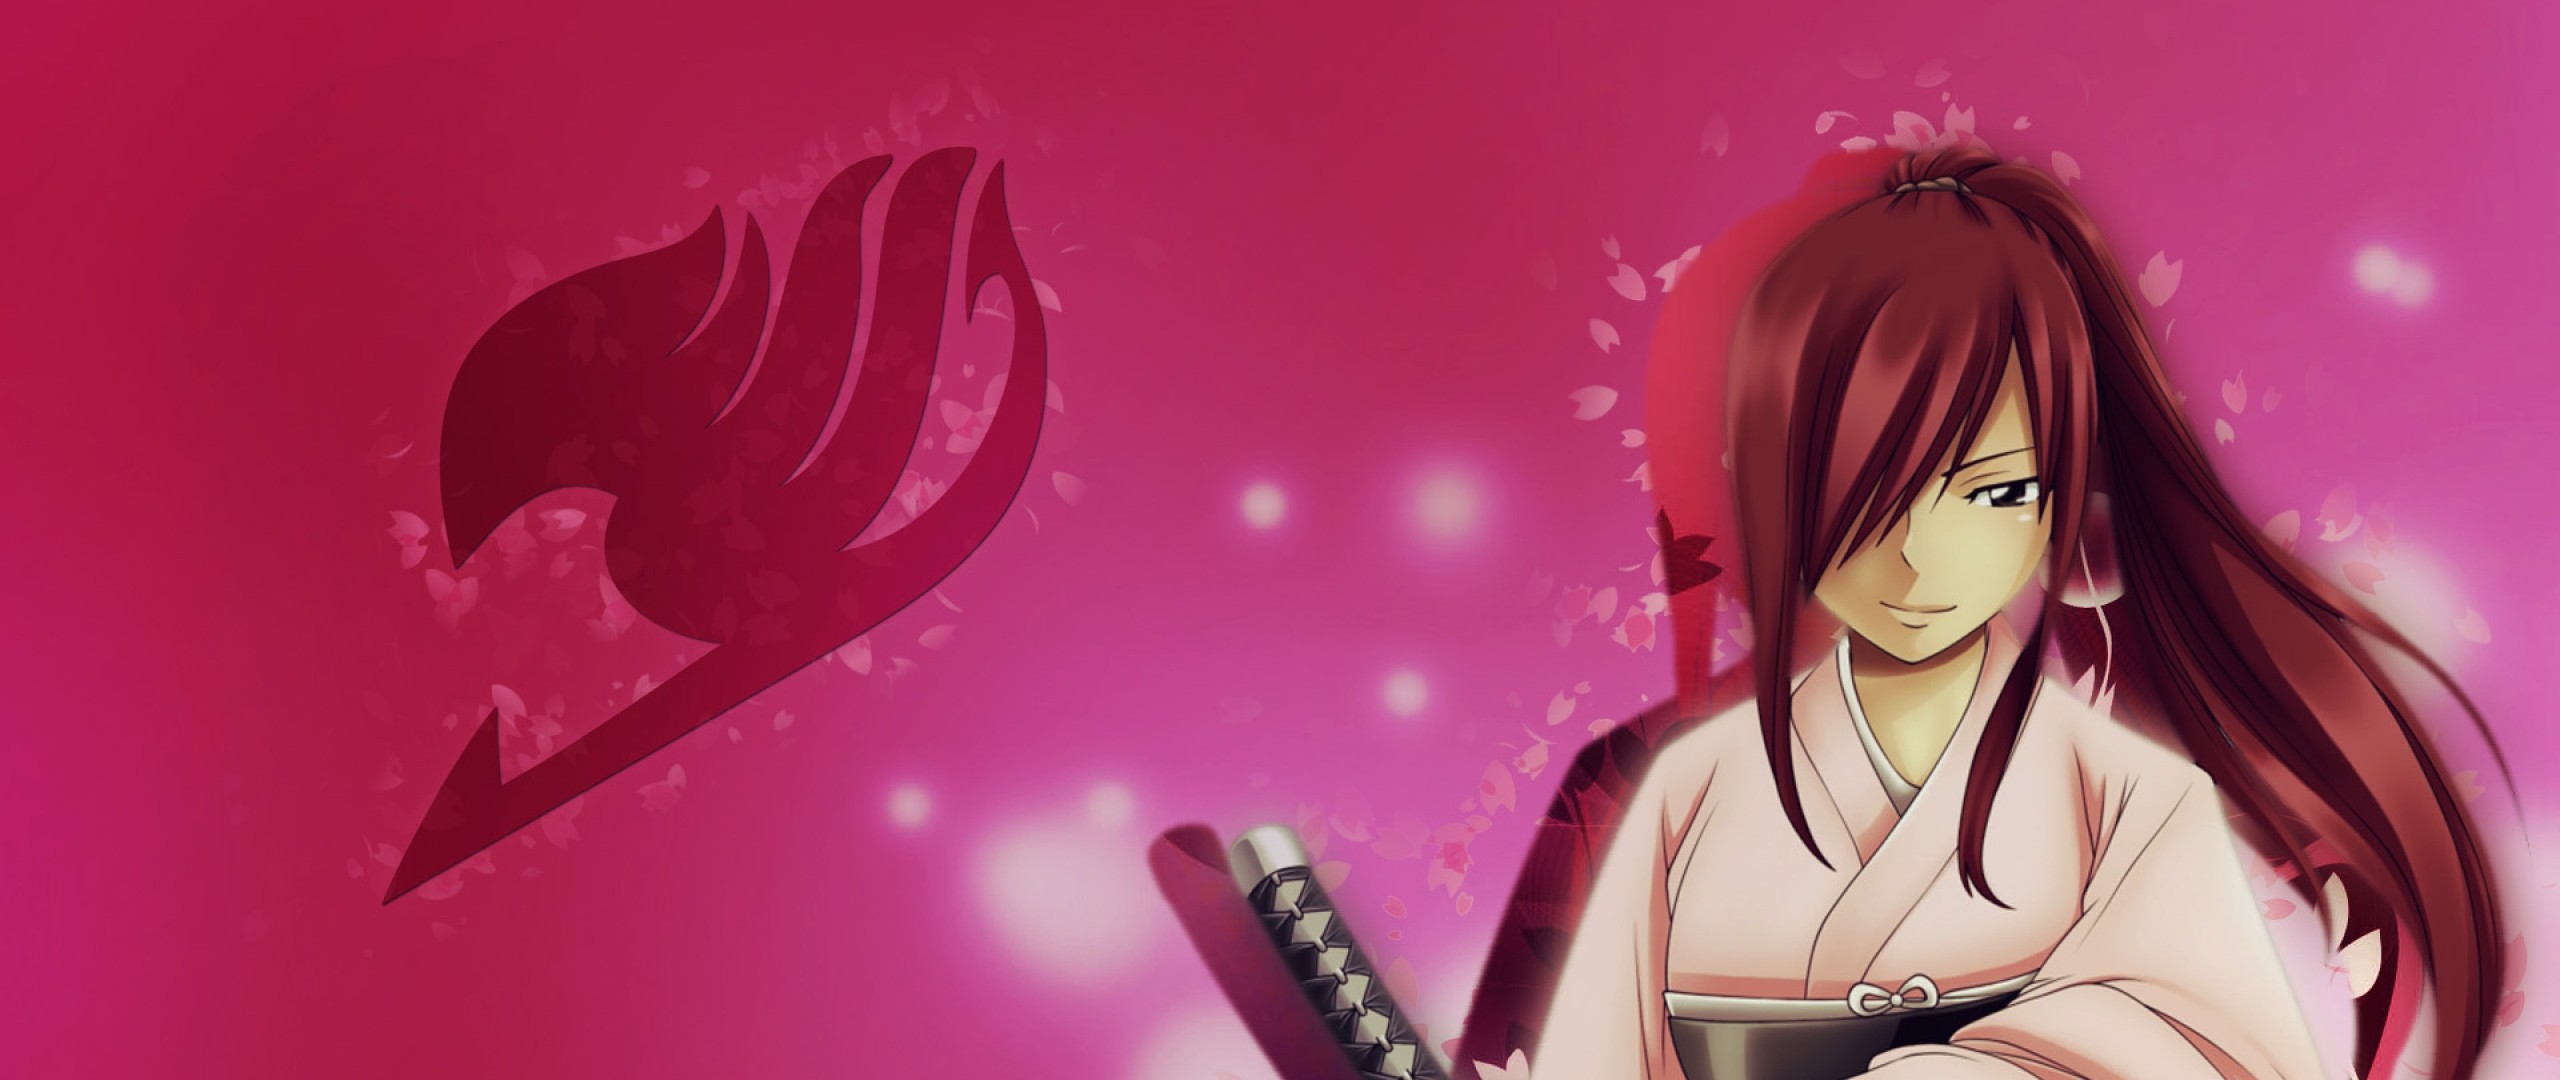 Wallpaper erza scarlet, fairy tail, mage, sword, art, anime